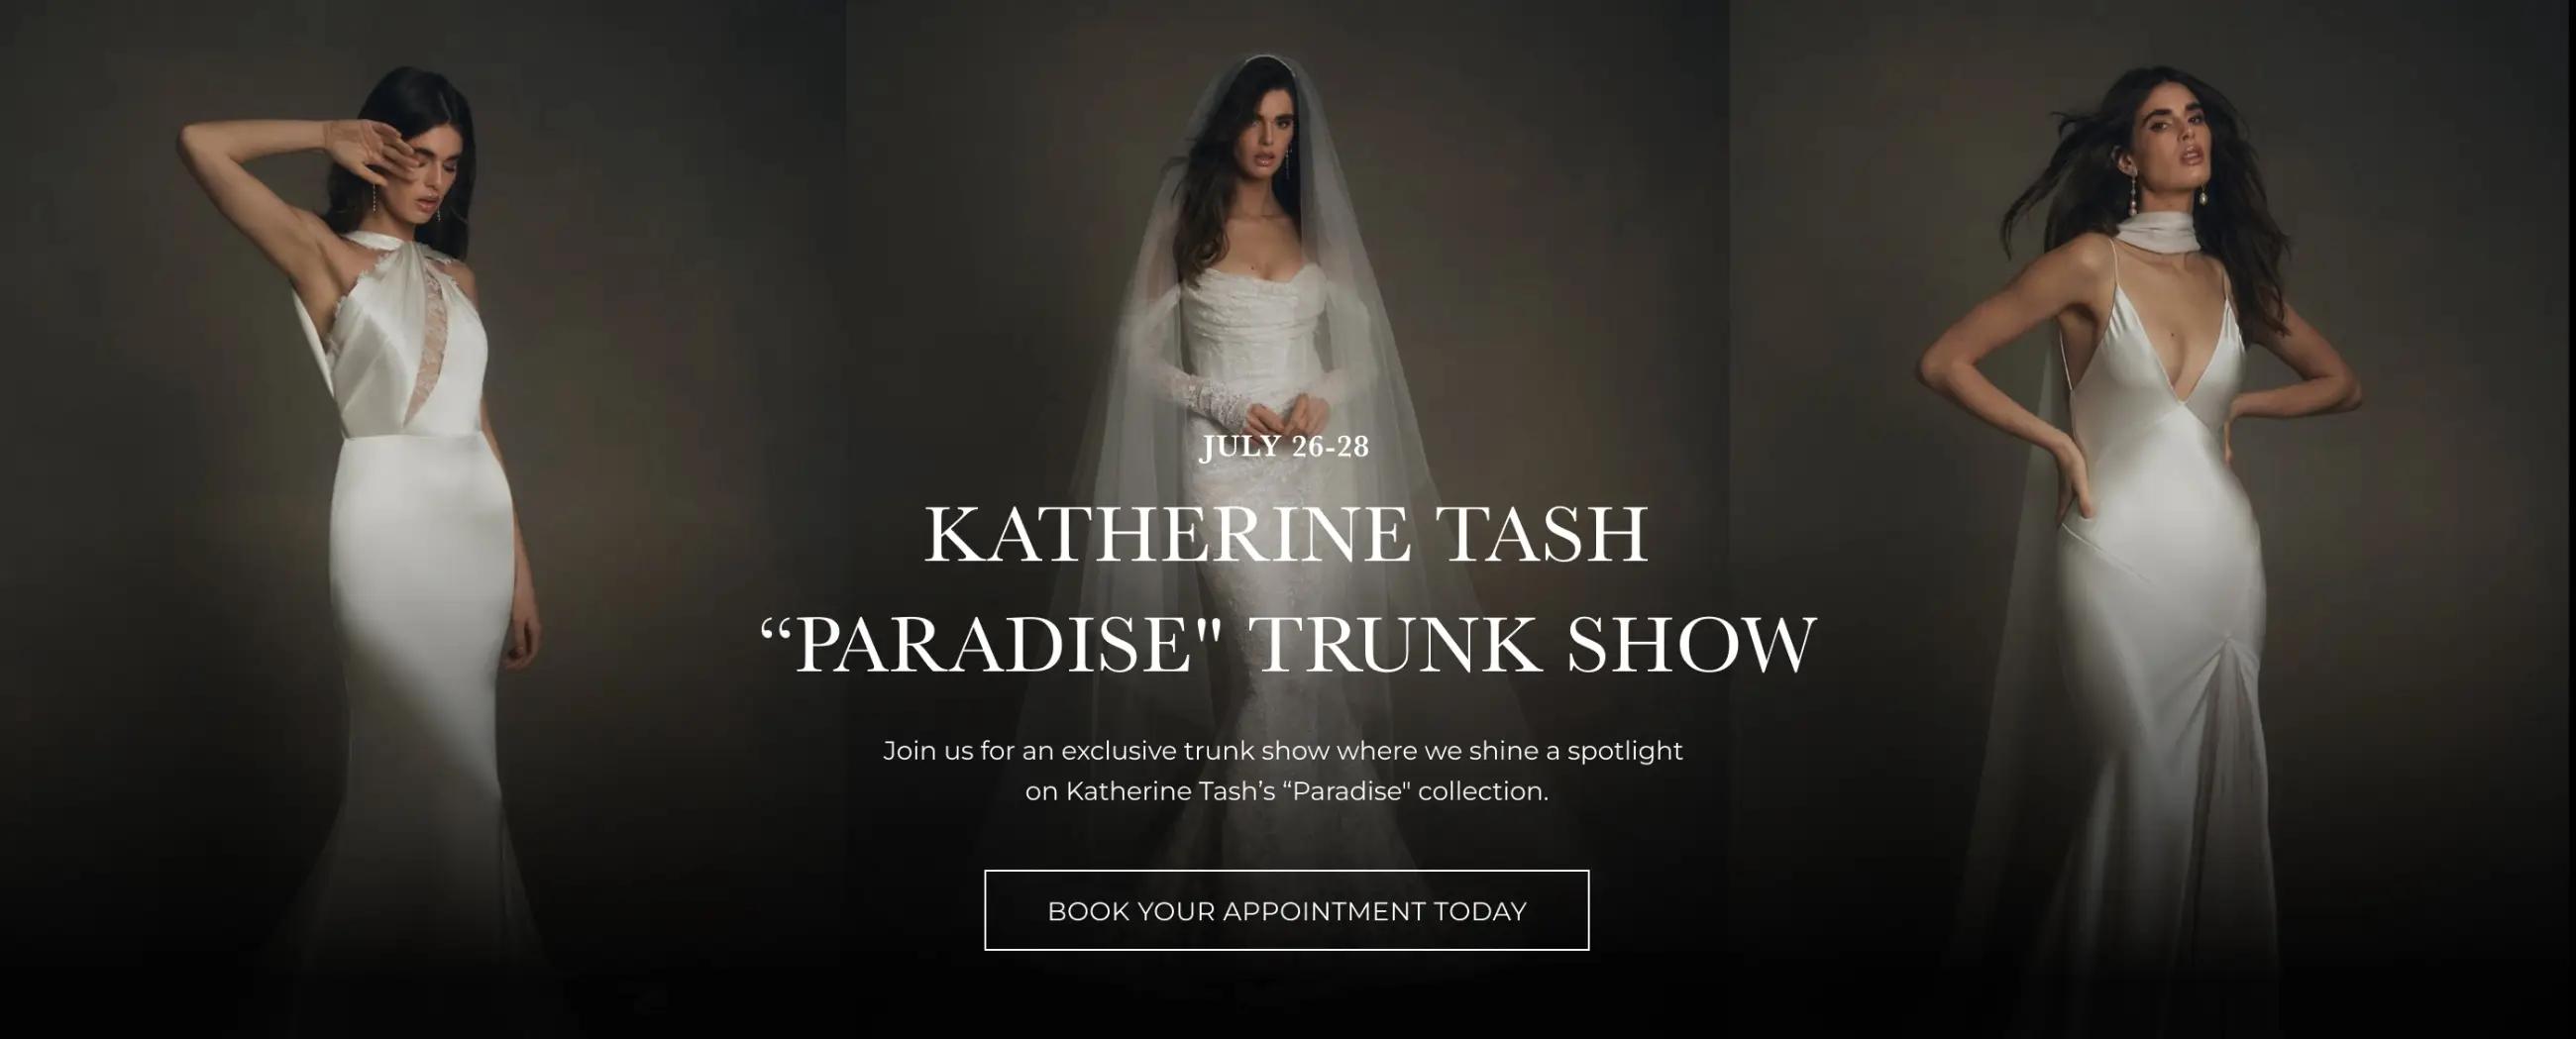 picture promoting katherine tash "paradise" collection trunk show evet